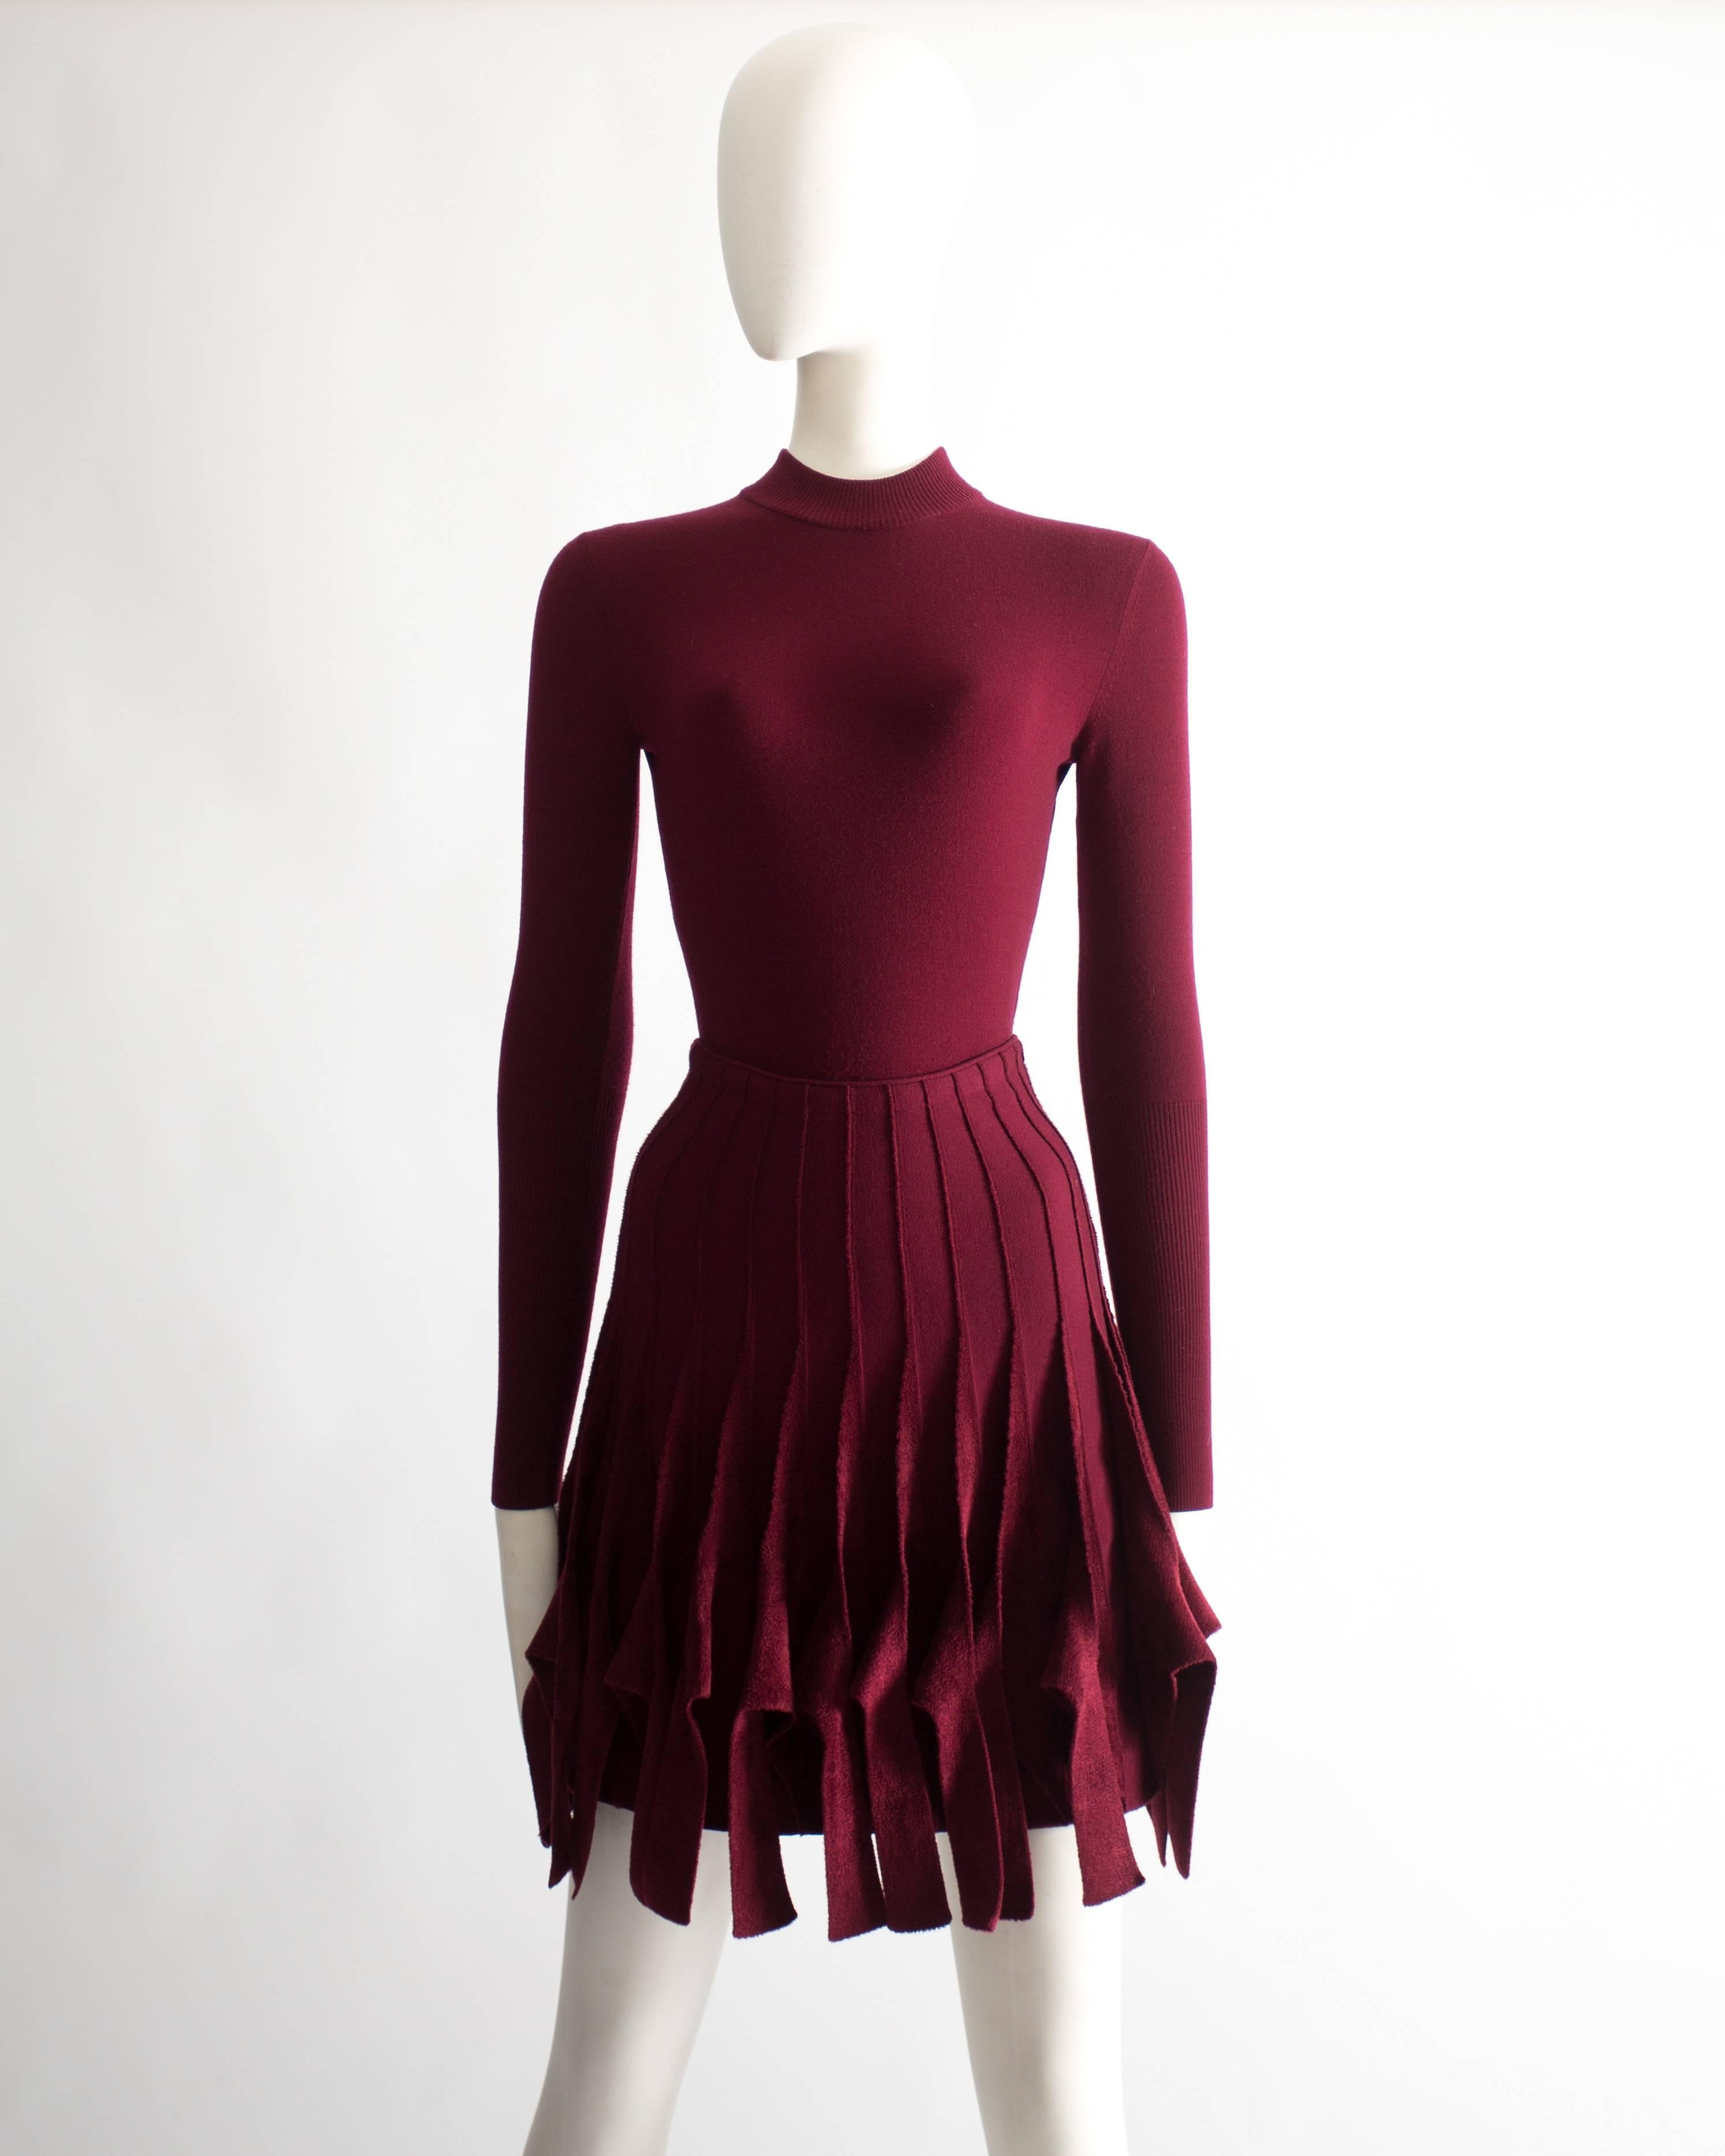 Alaia ensemble. Wool body with turtle neck and long fitted sleeves and wool fringed skirt with chenille panels. 